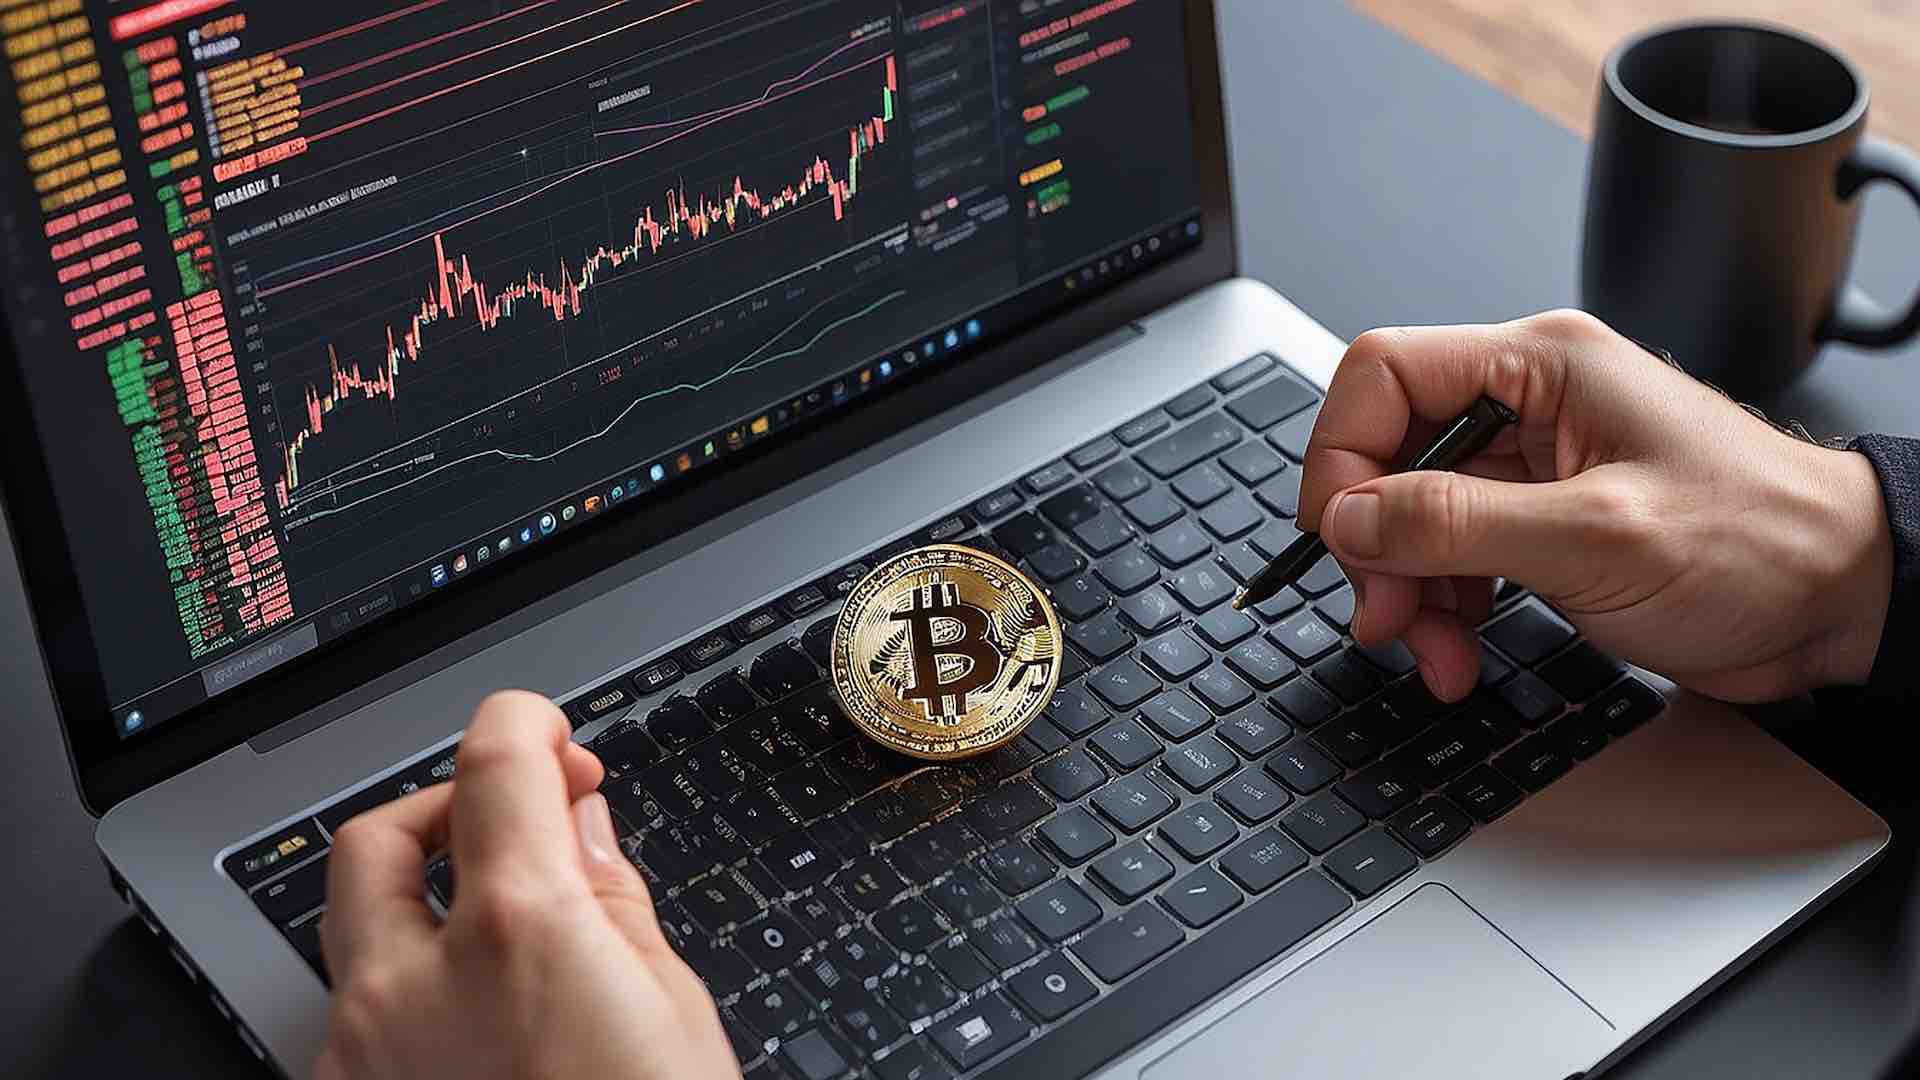 Bitcoin plummets to $57k as crypto market suffers pre-Fed jitters